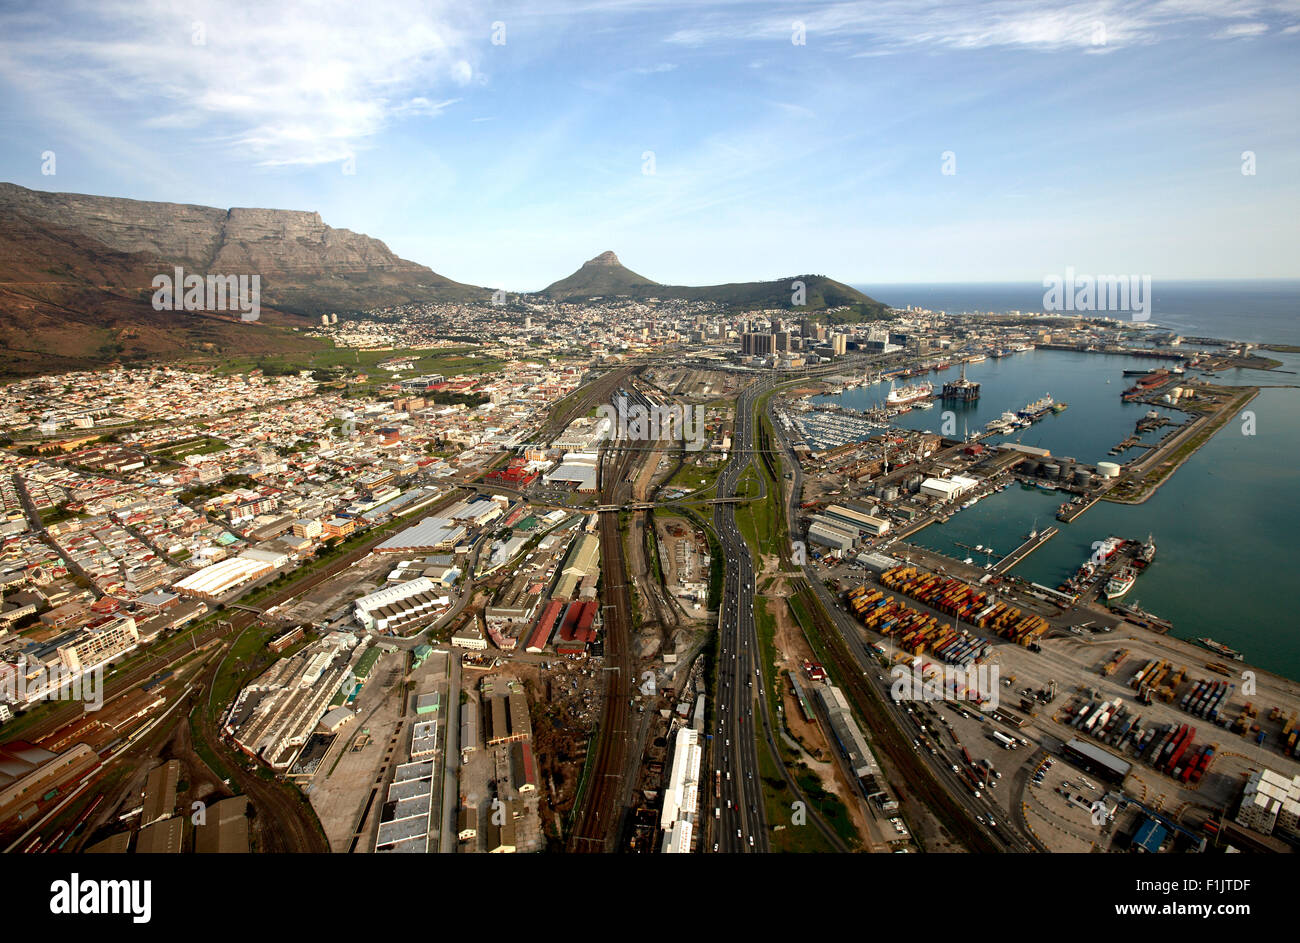 Aerial view of Cape Town's Roads and harbour Stock Photo